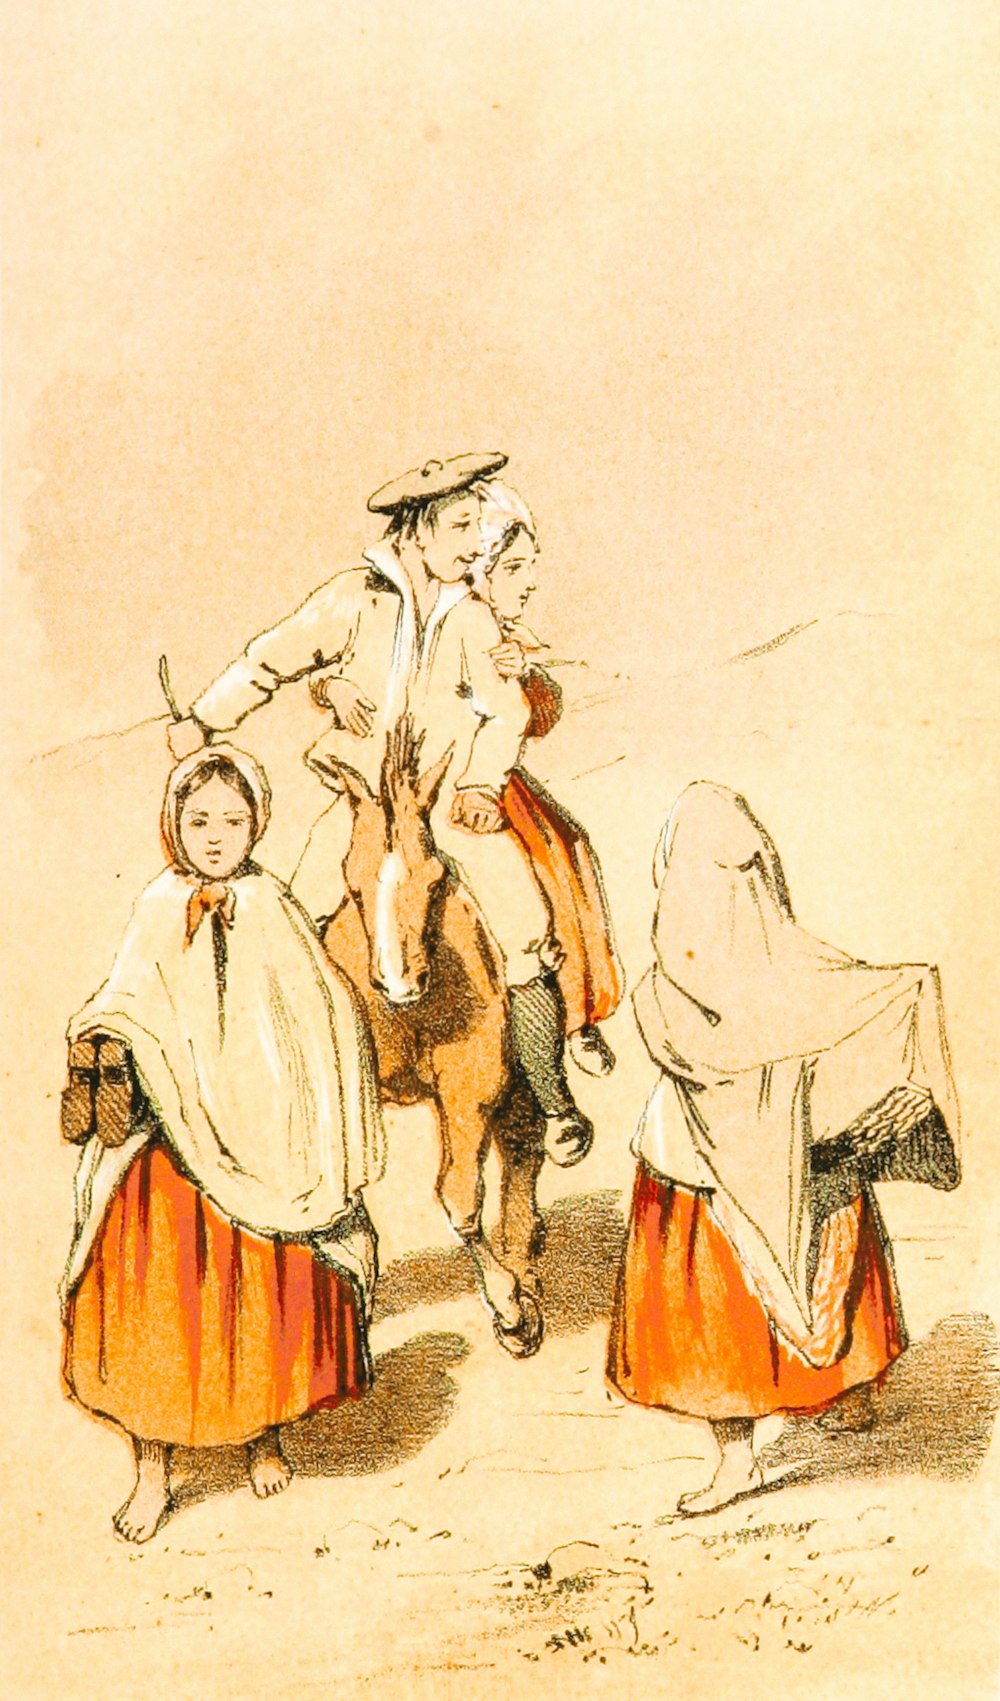 a drawing of a man riding on the back of a horse